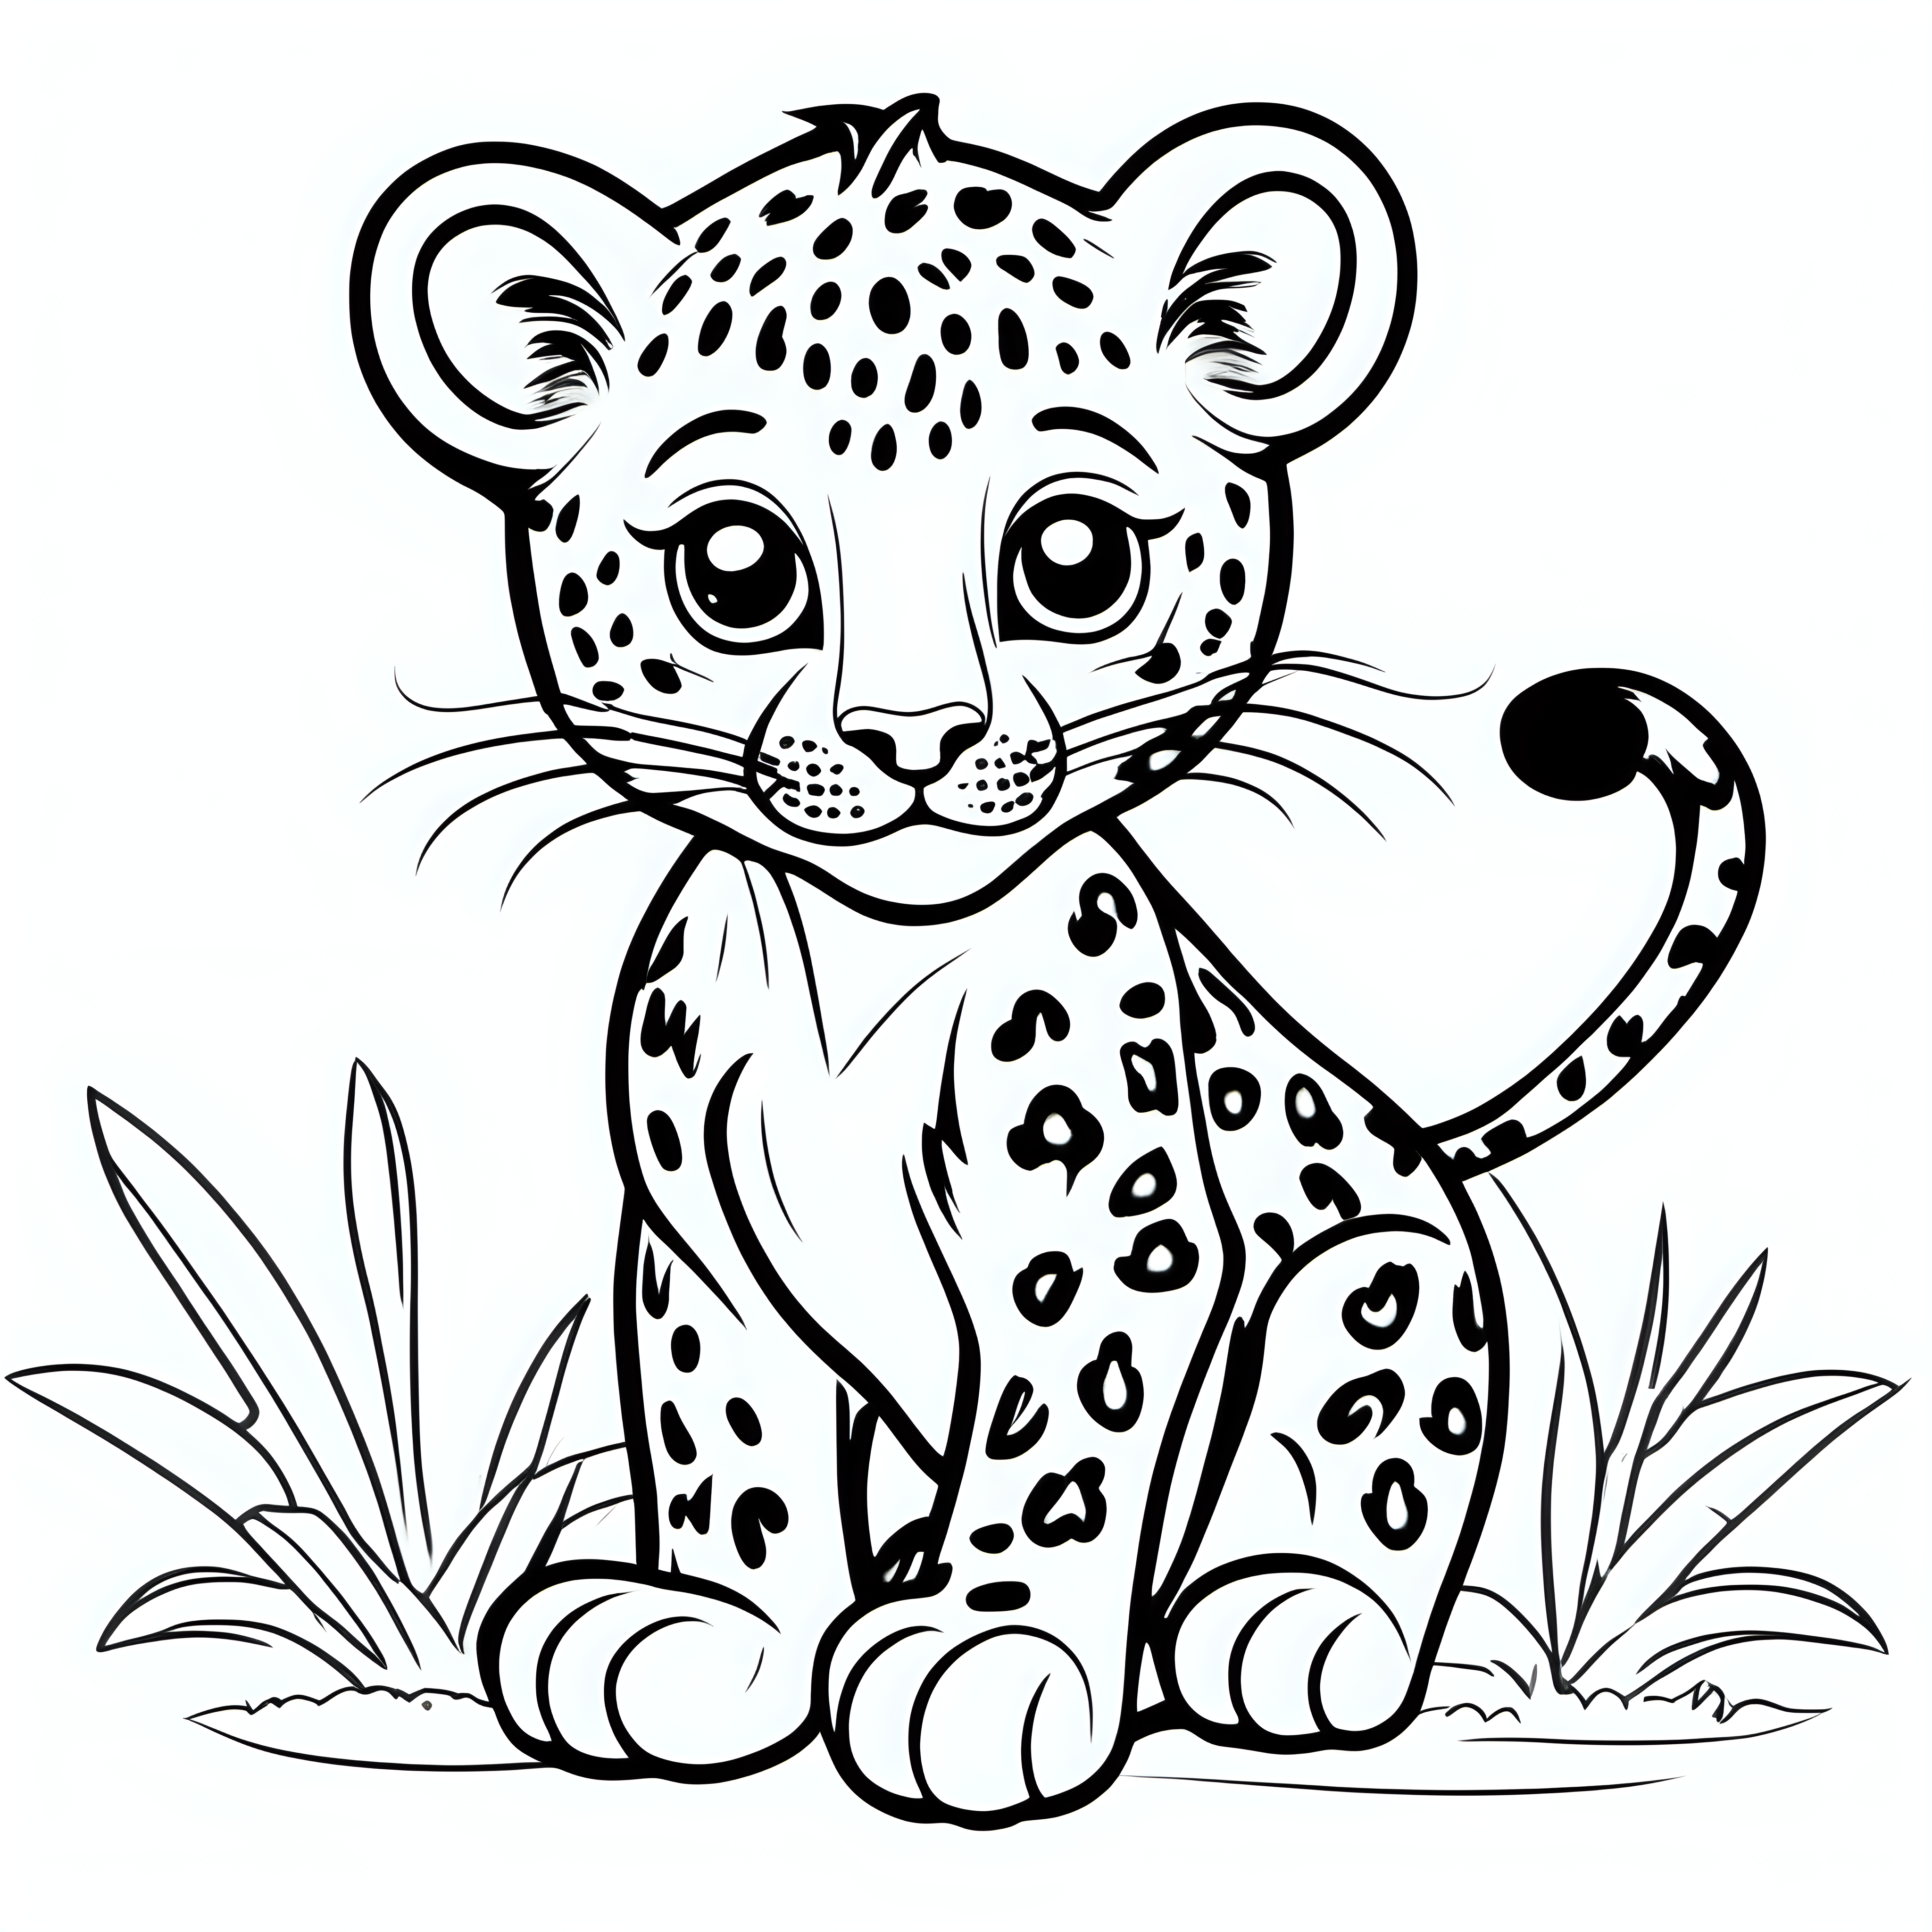 draw a cute baby leopard with only the outline in black for a coloring book for kids